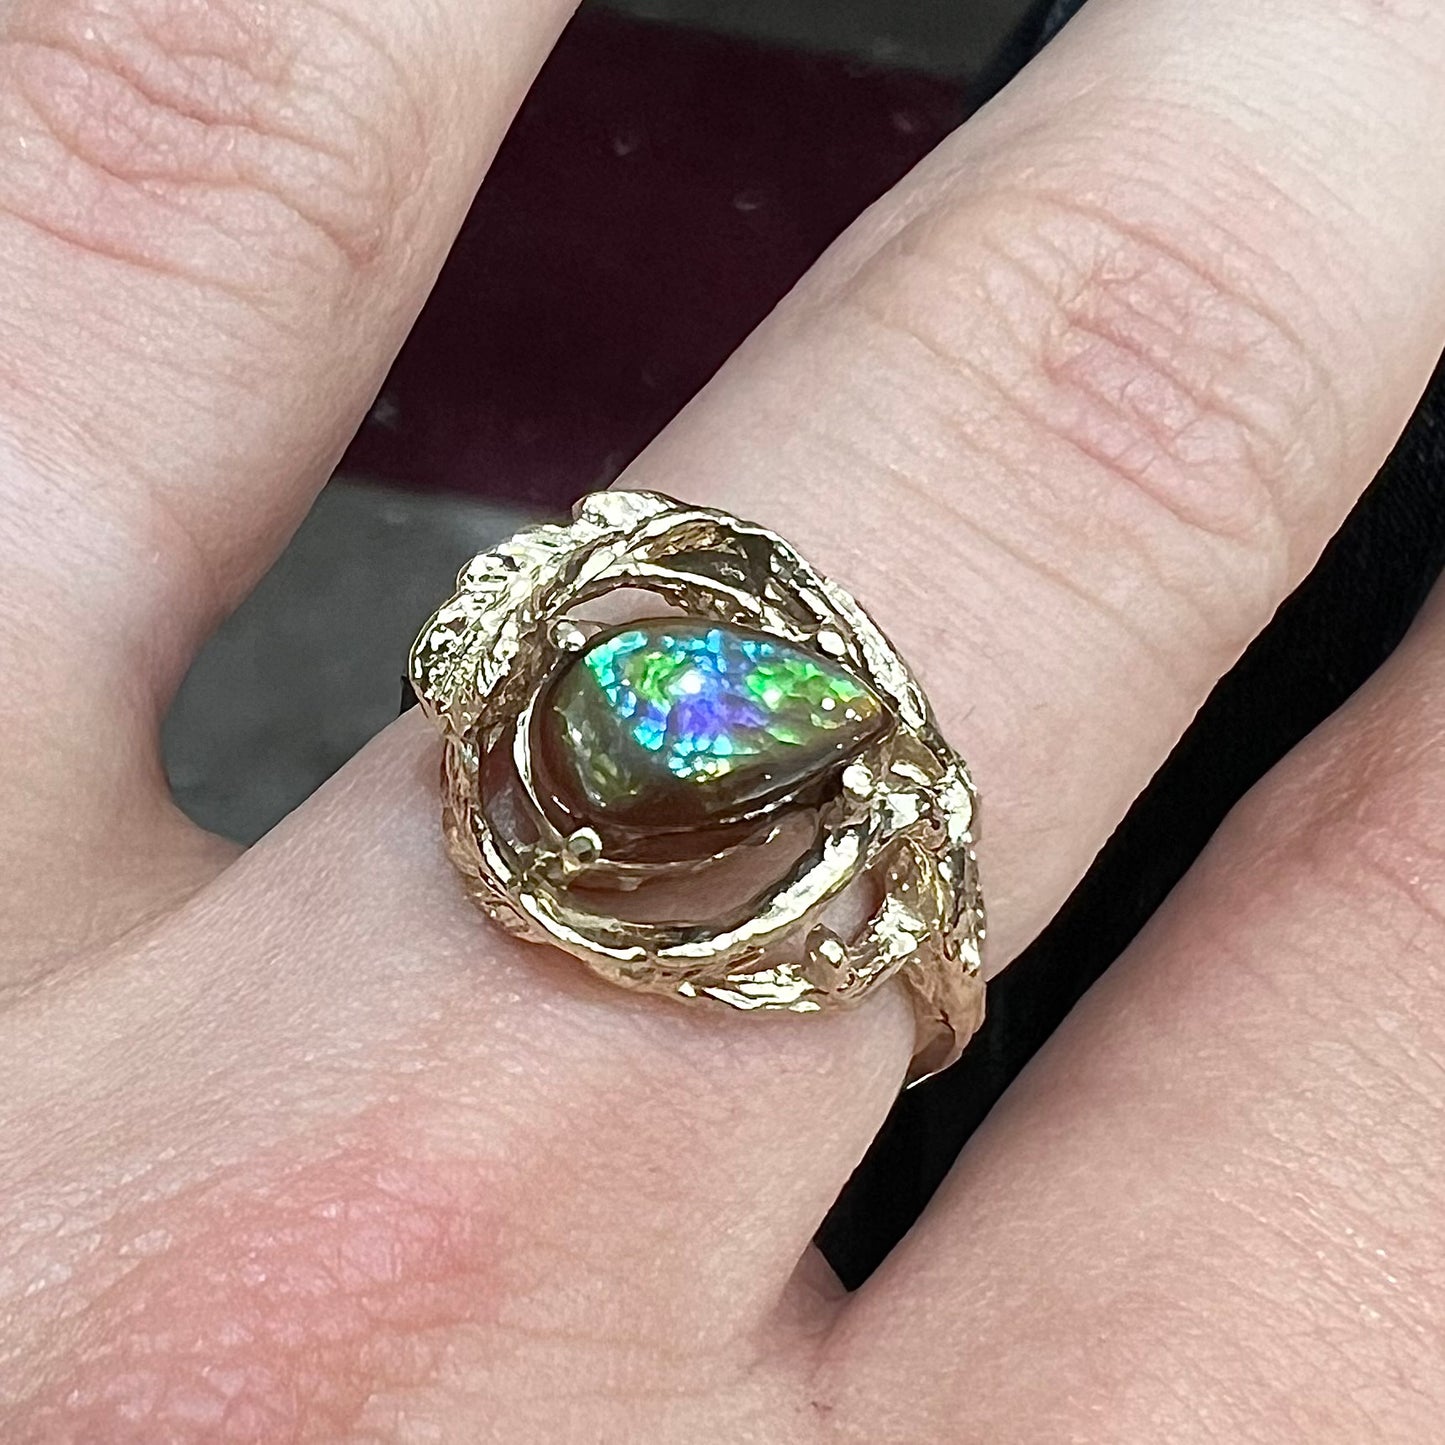 A ladies' organic style yellow gold ring set with a pear shaped cabochon cut Mexican fire agate.  The stone shines green and purple.